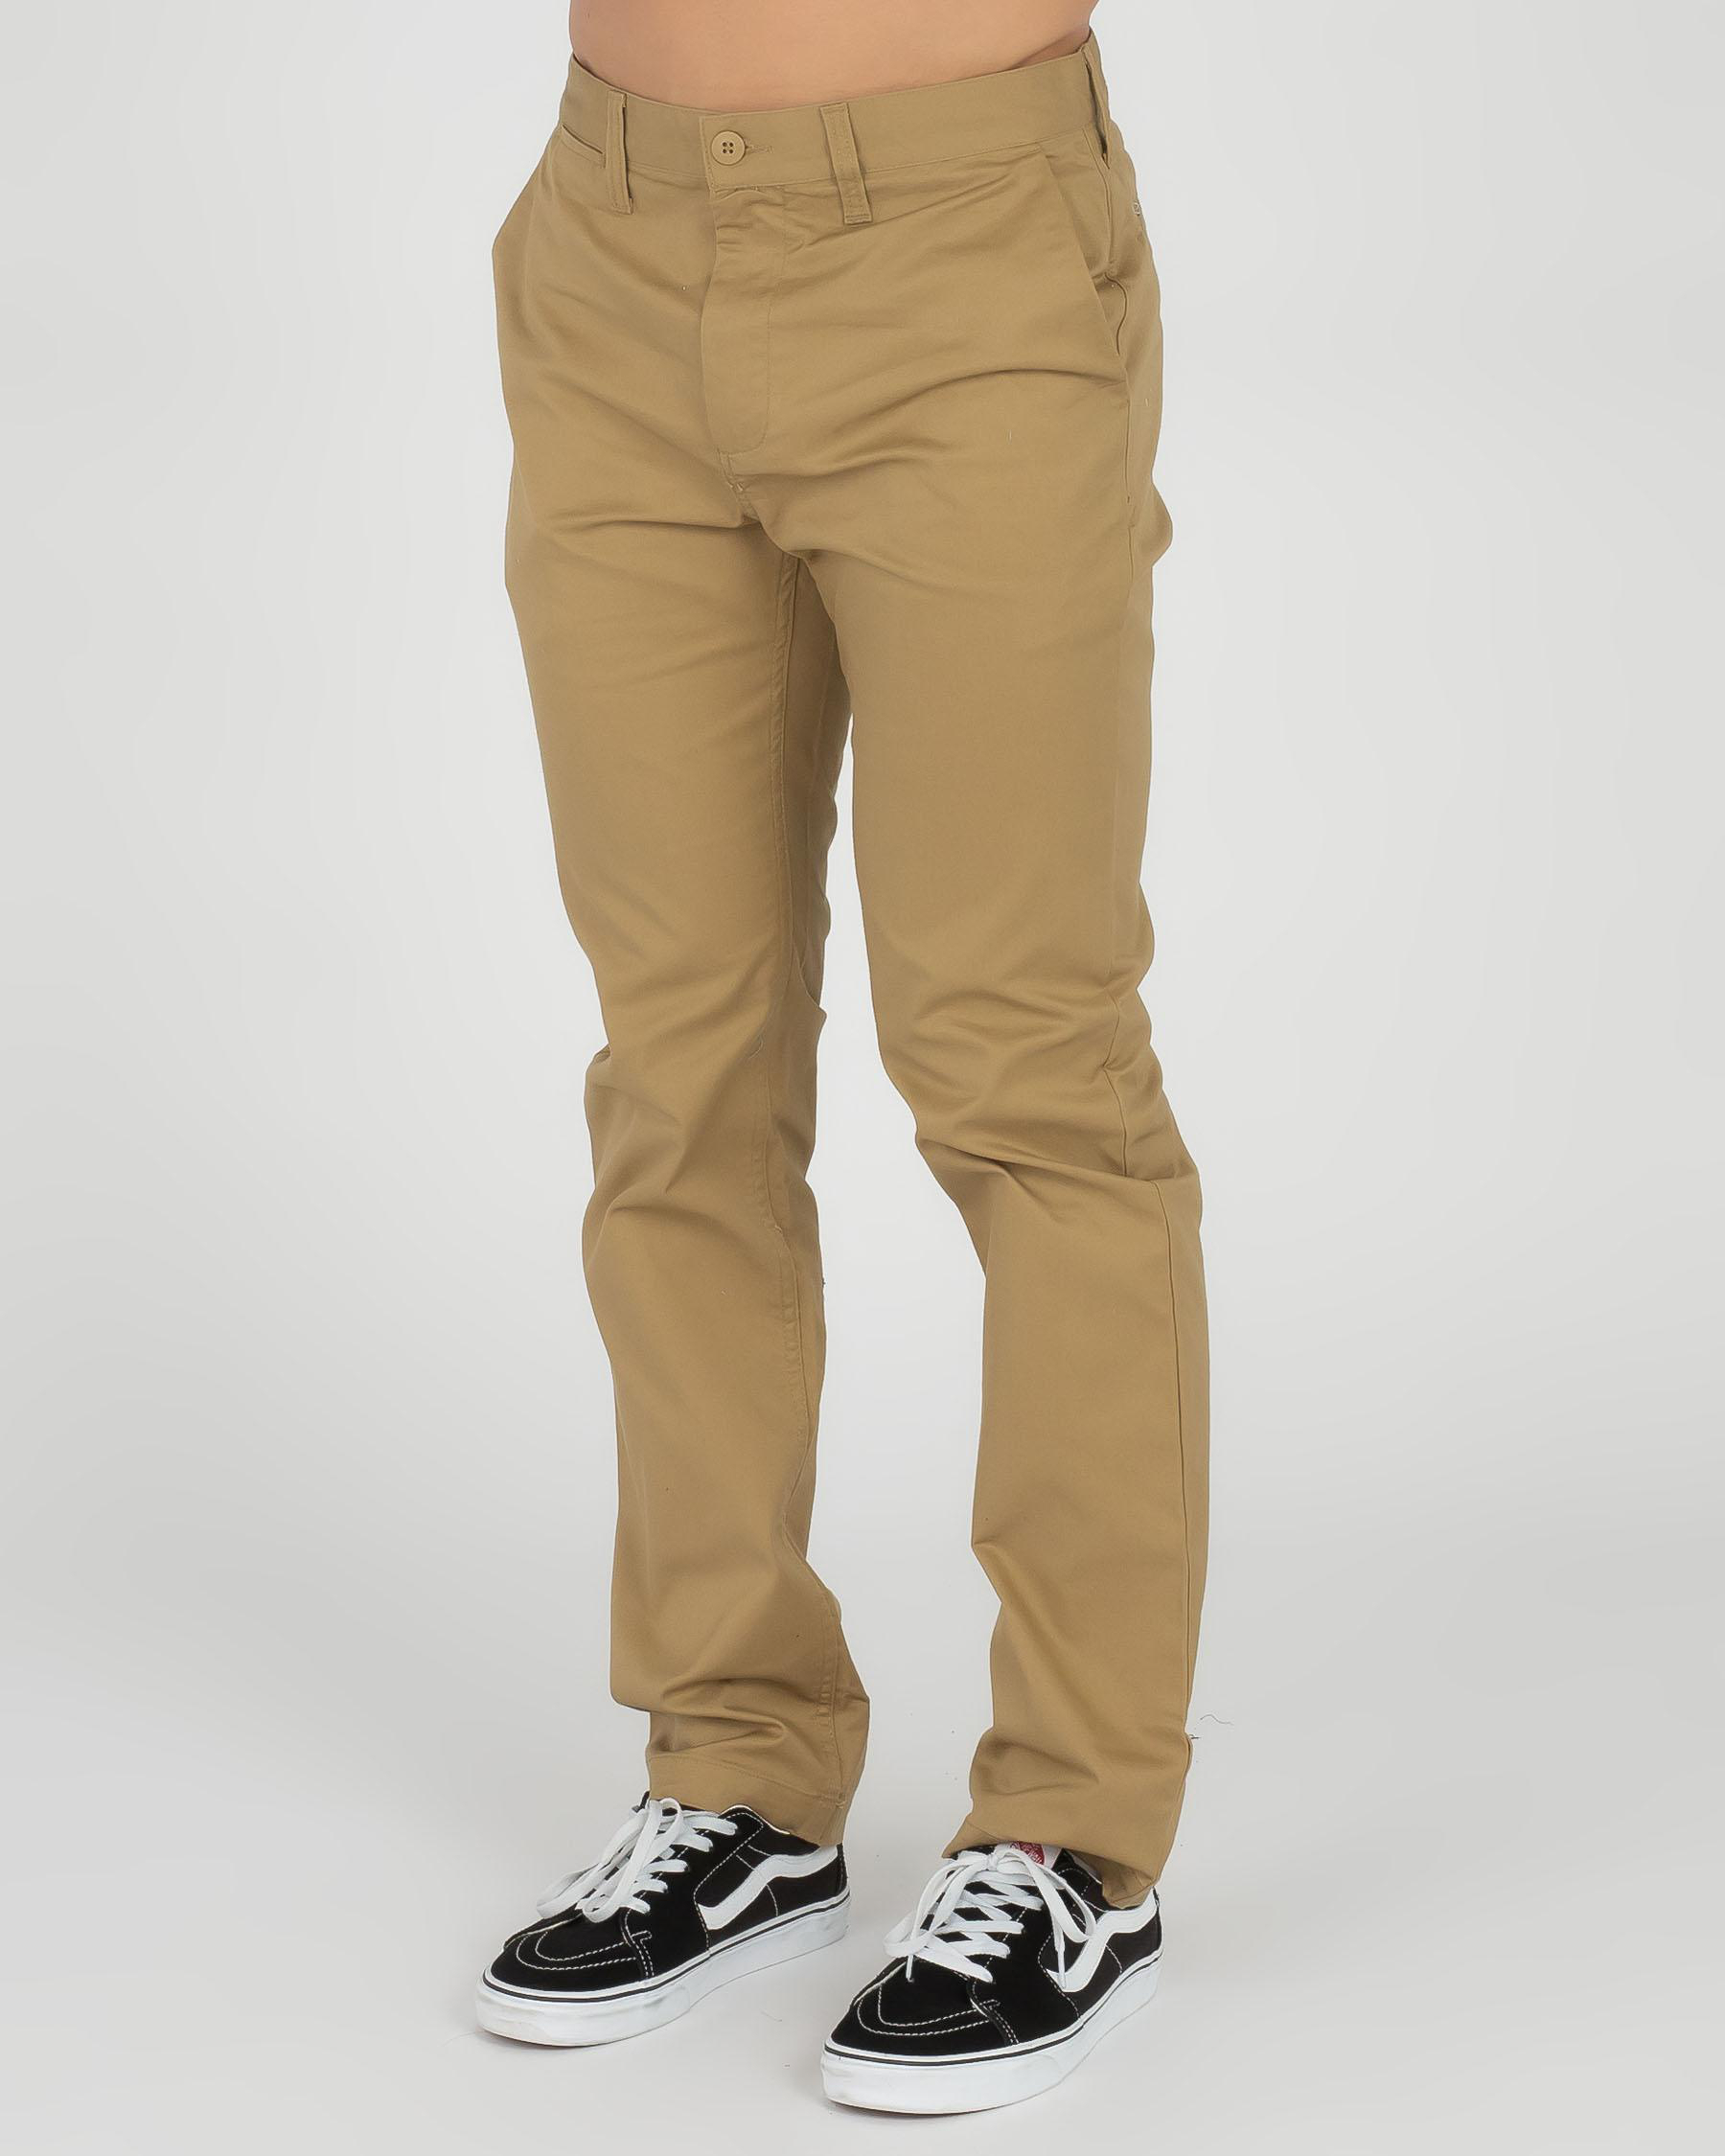 DC Shoes Worker Chino Pants In Khaki - Fast Shipping & Easy Returns ...